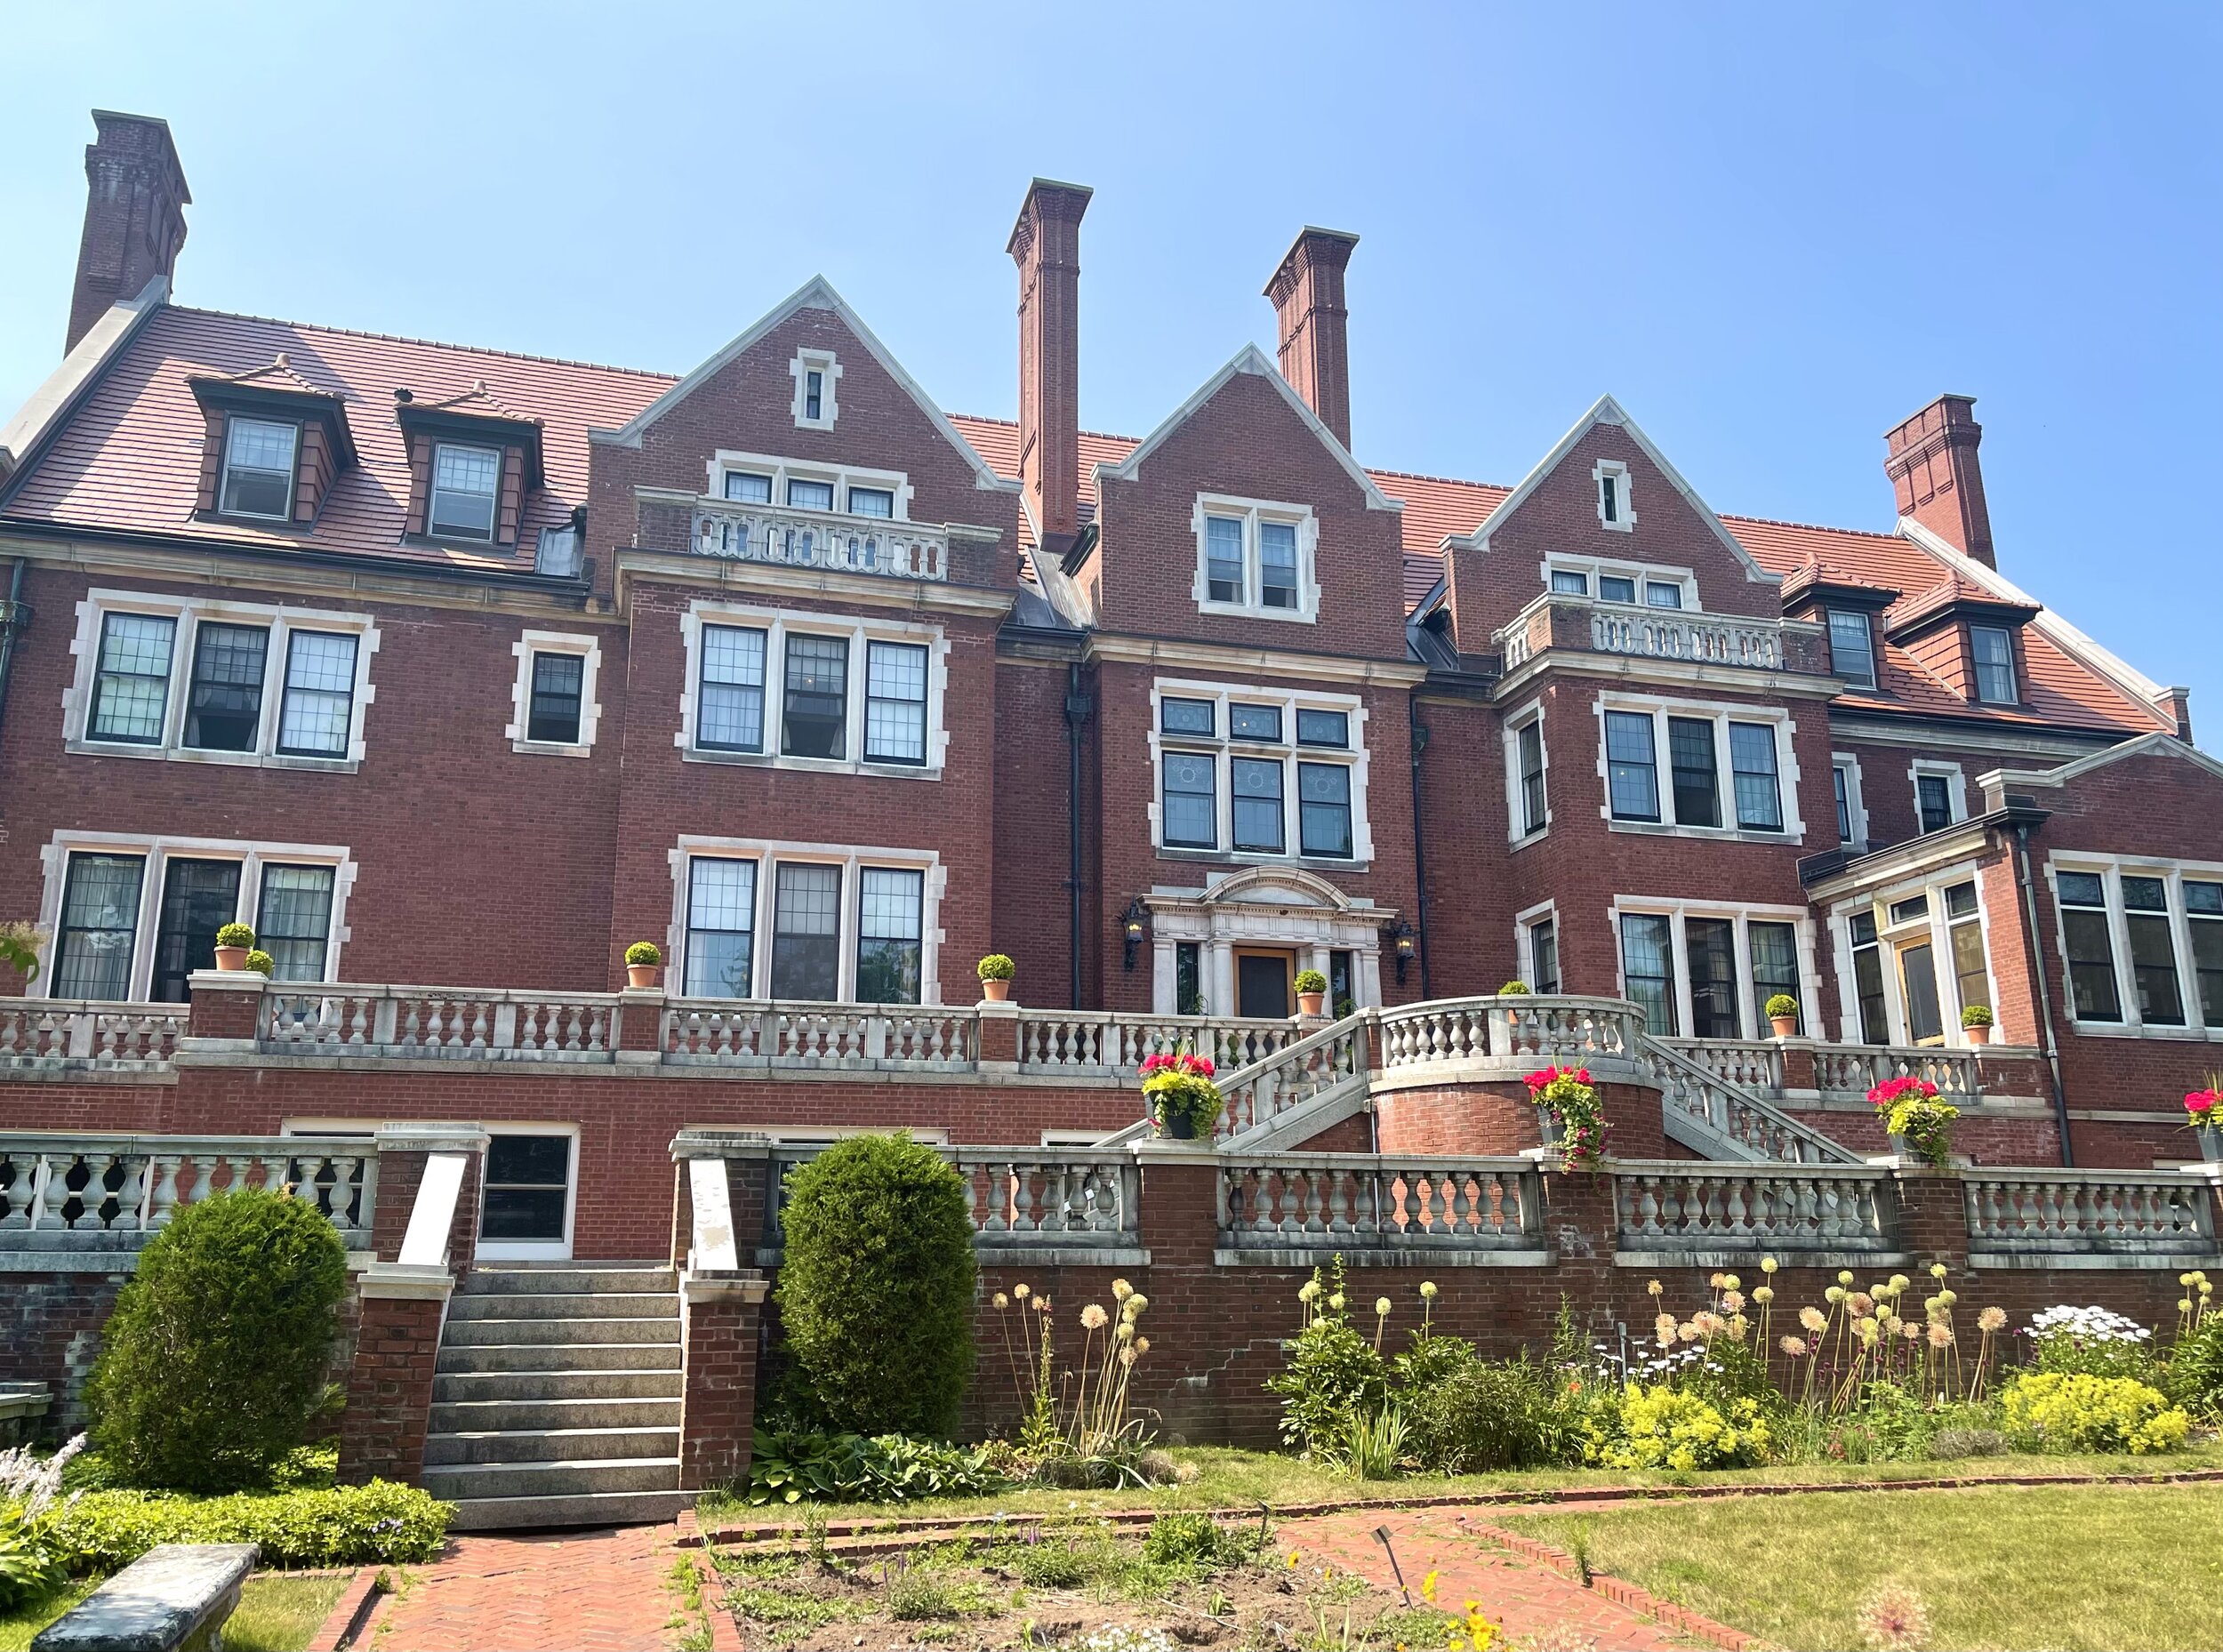  In the early 1900s, there were more millionaires per capita in Duluth, Minnesota, than in any other city in the world. Chester and Clara Congdon were among Duluth’s most prominent. In 1905, construction began on their 27,000 sq. ft.  Glensheen Mansi